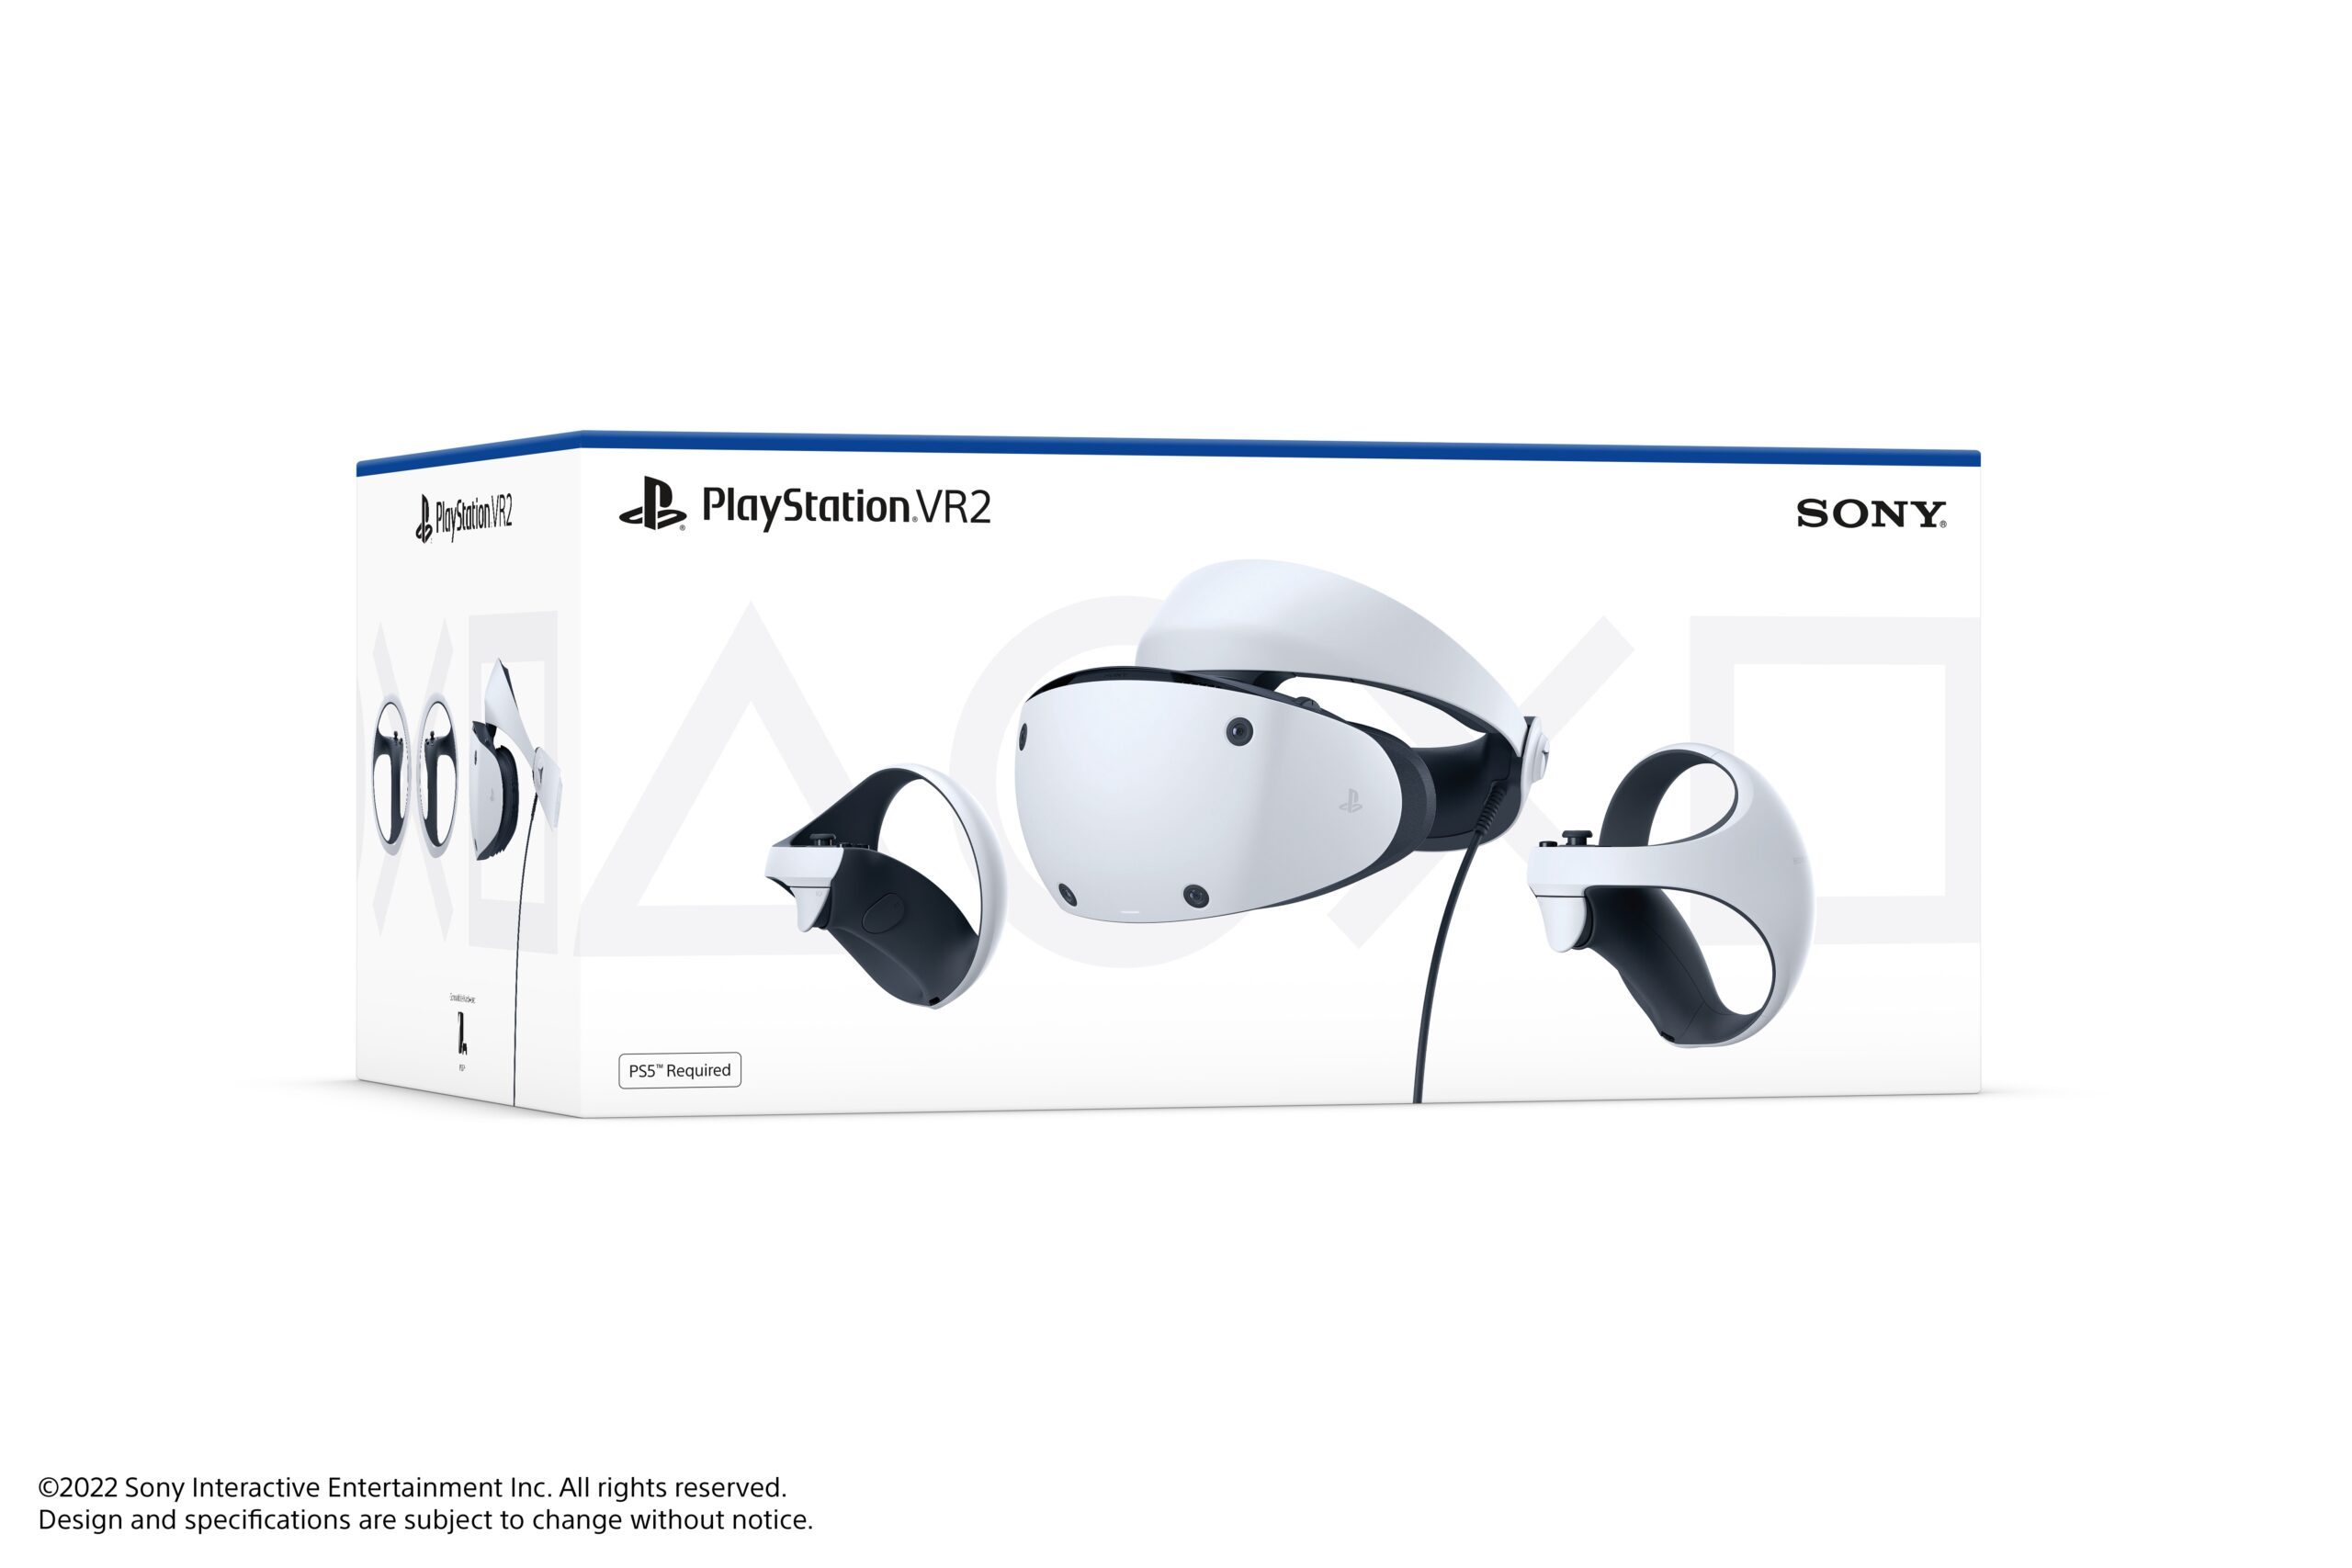 Does PSVR 2 work on PS4?